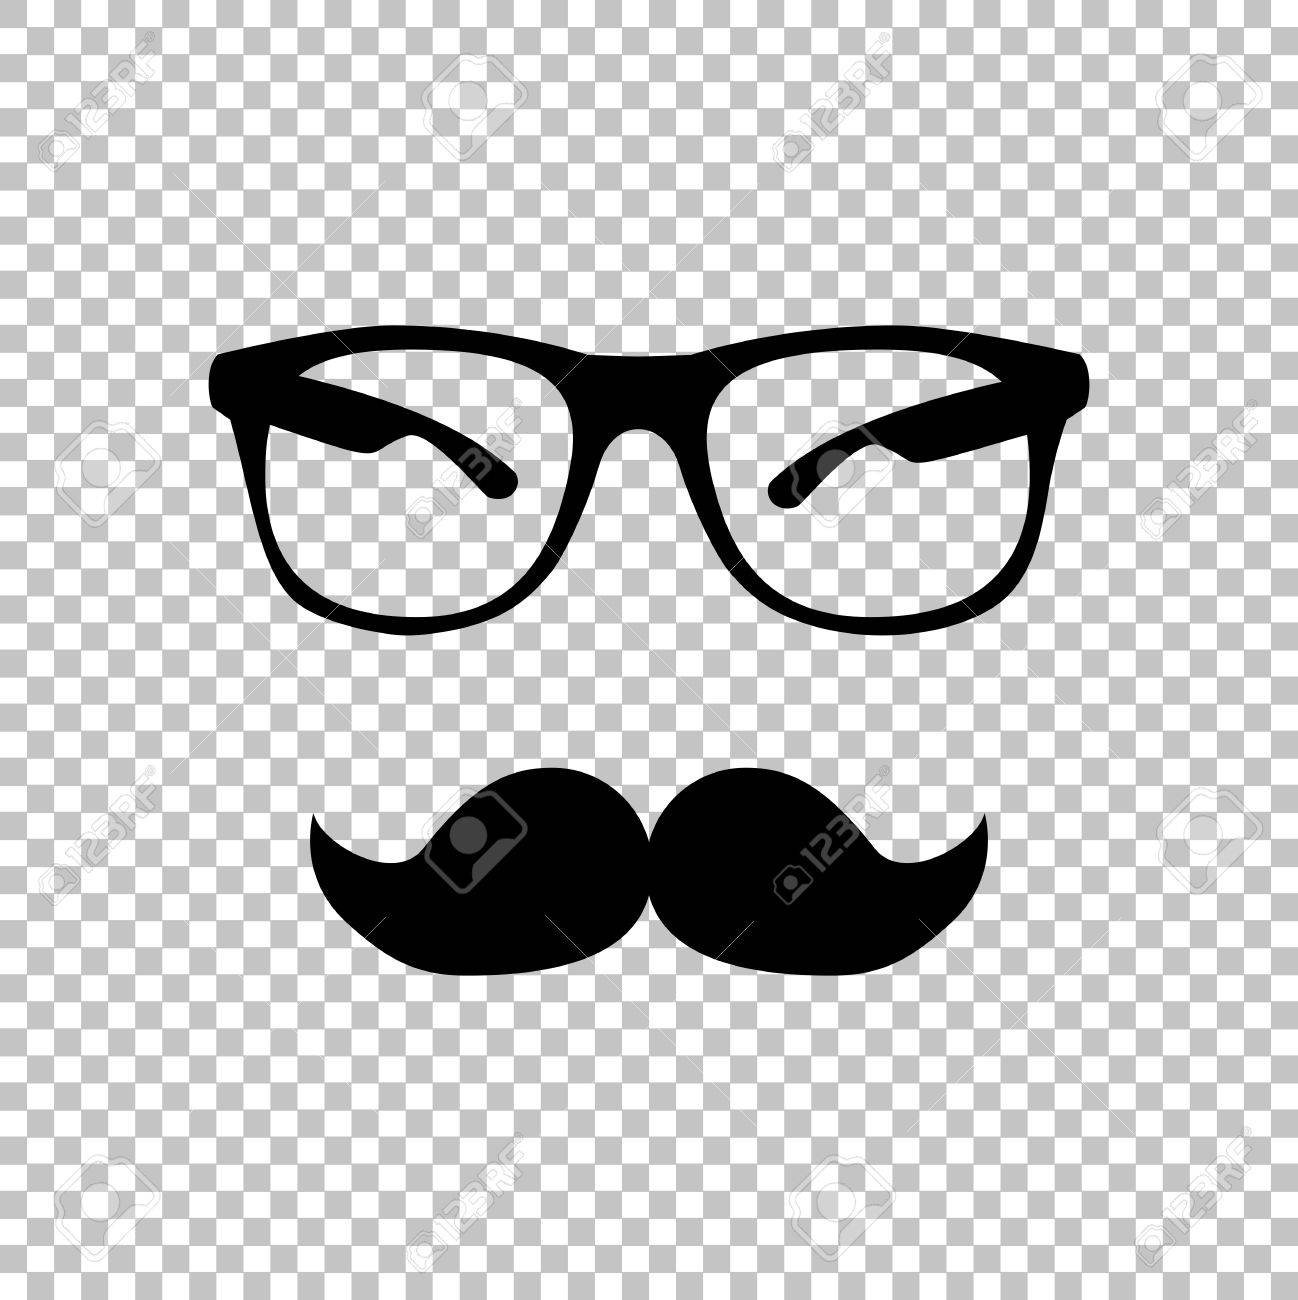 Mustache and Glasses sign. Flat style icon on transparent background.